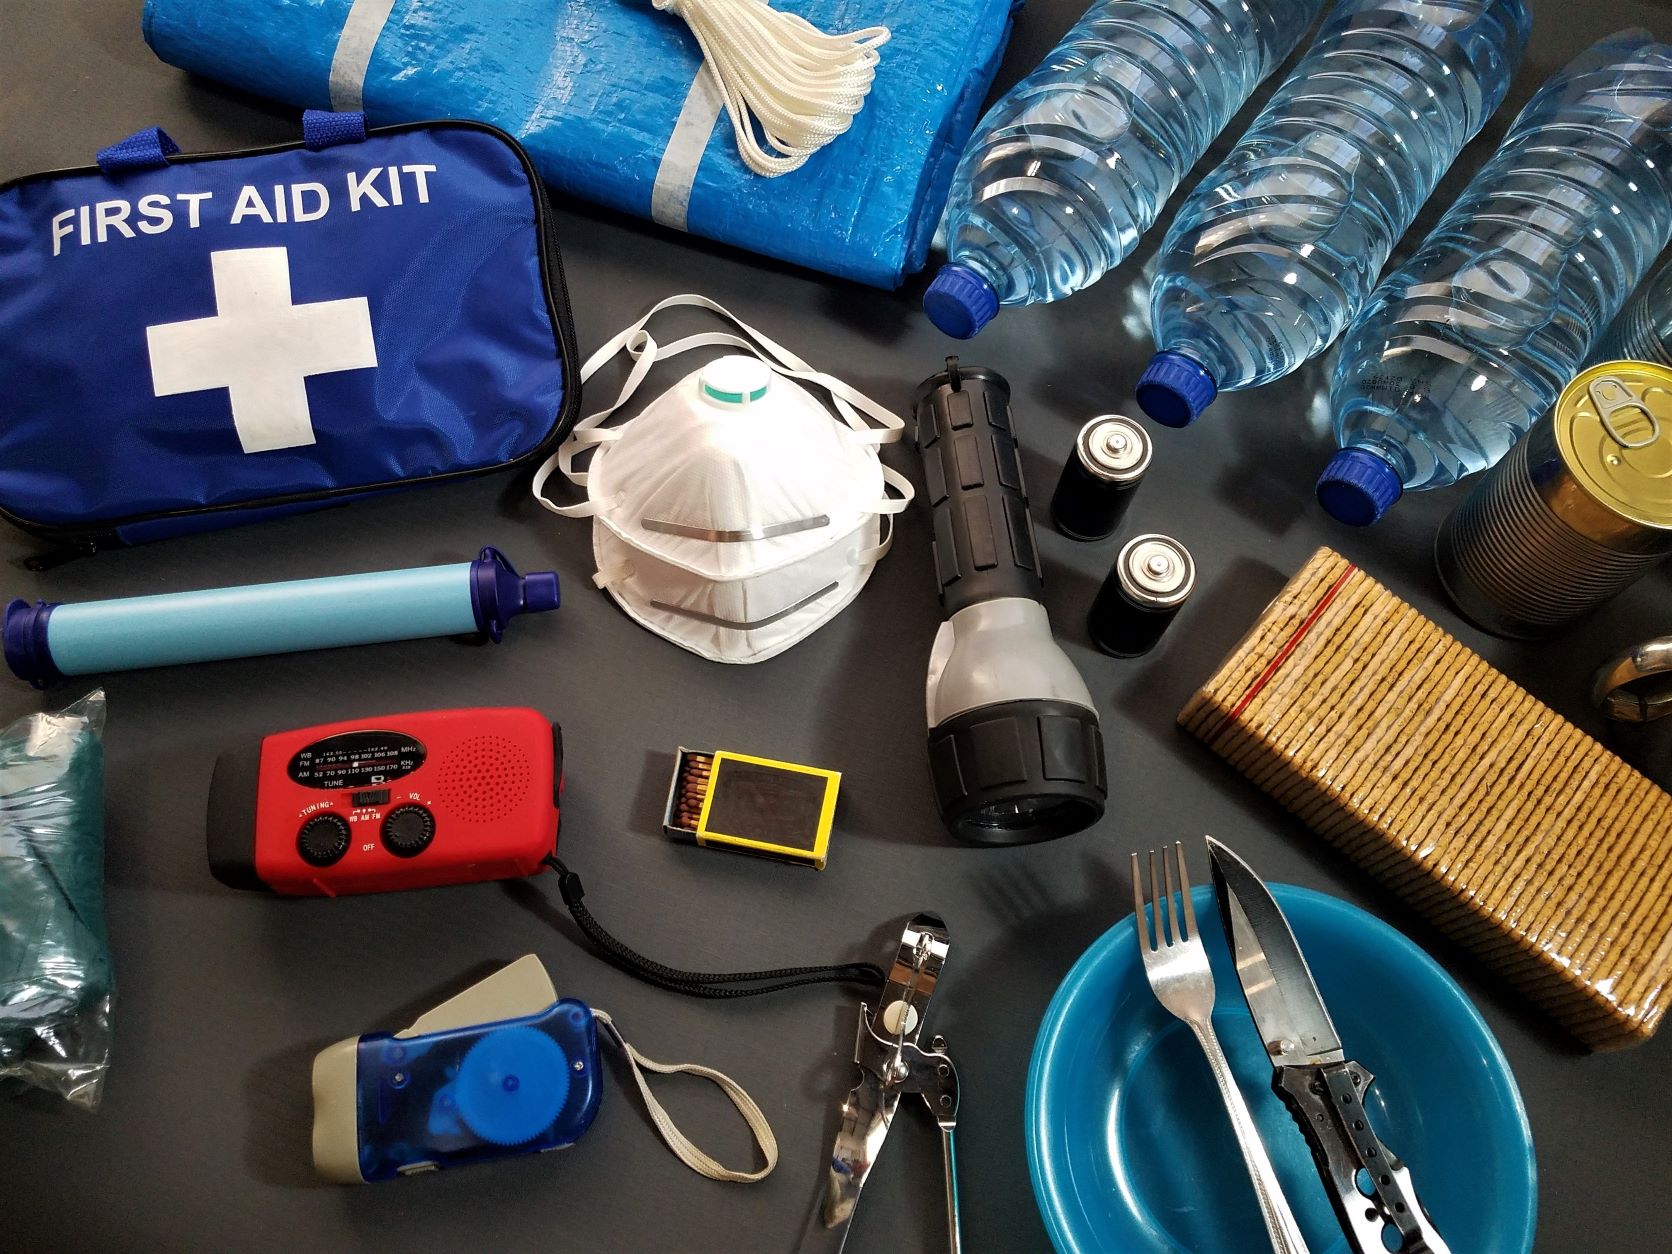 Emergency Kit Supplies and first aid kit